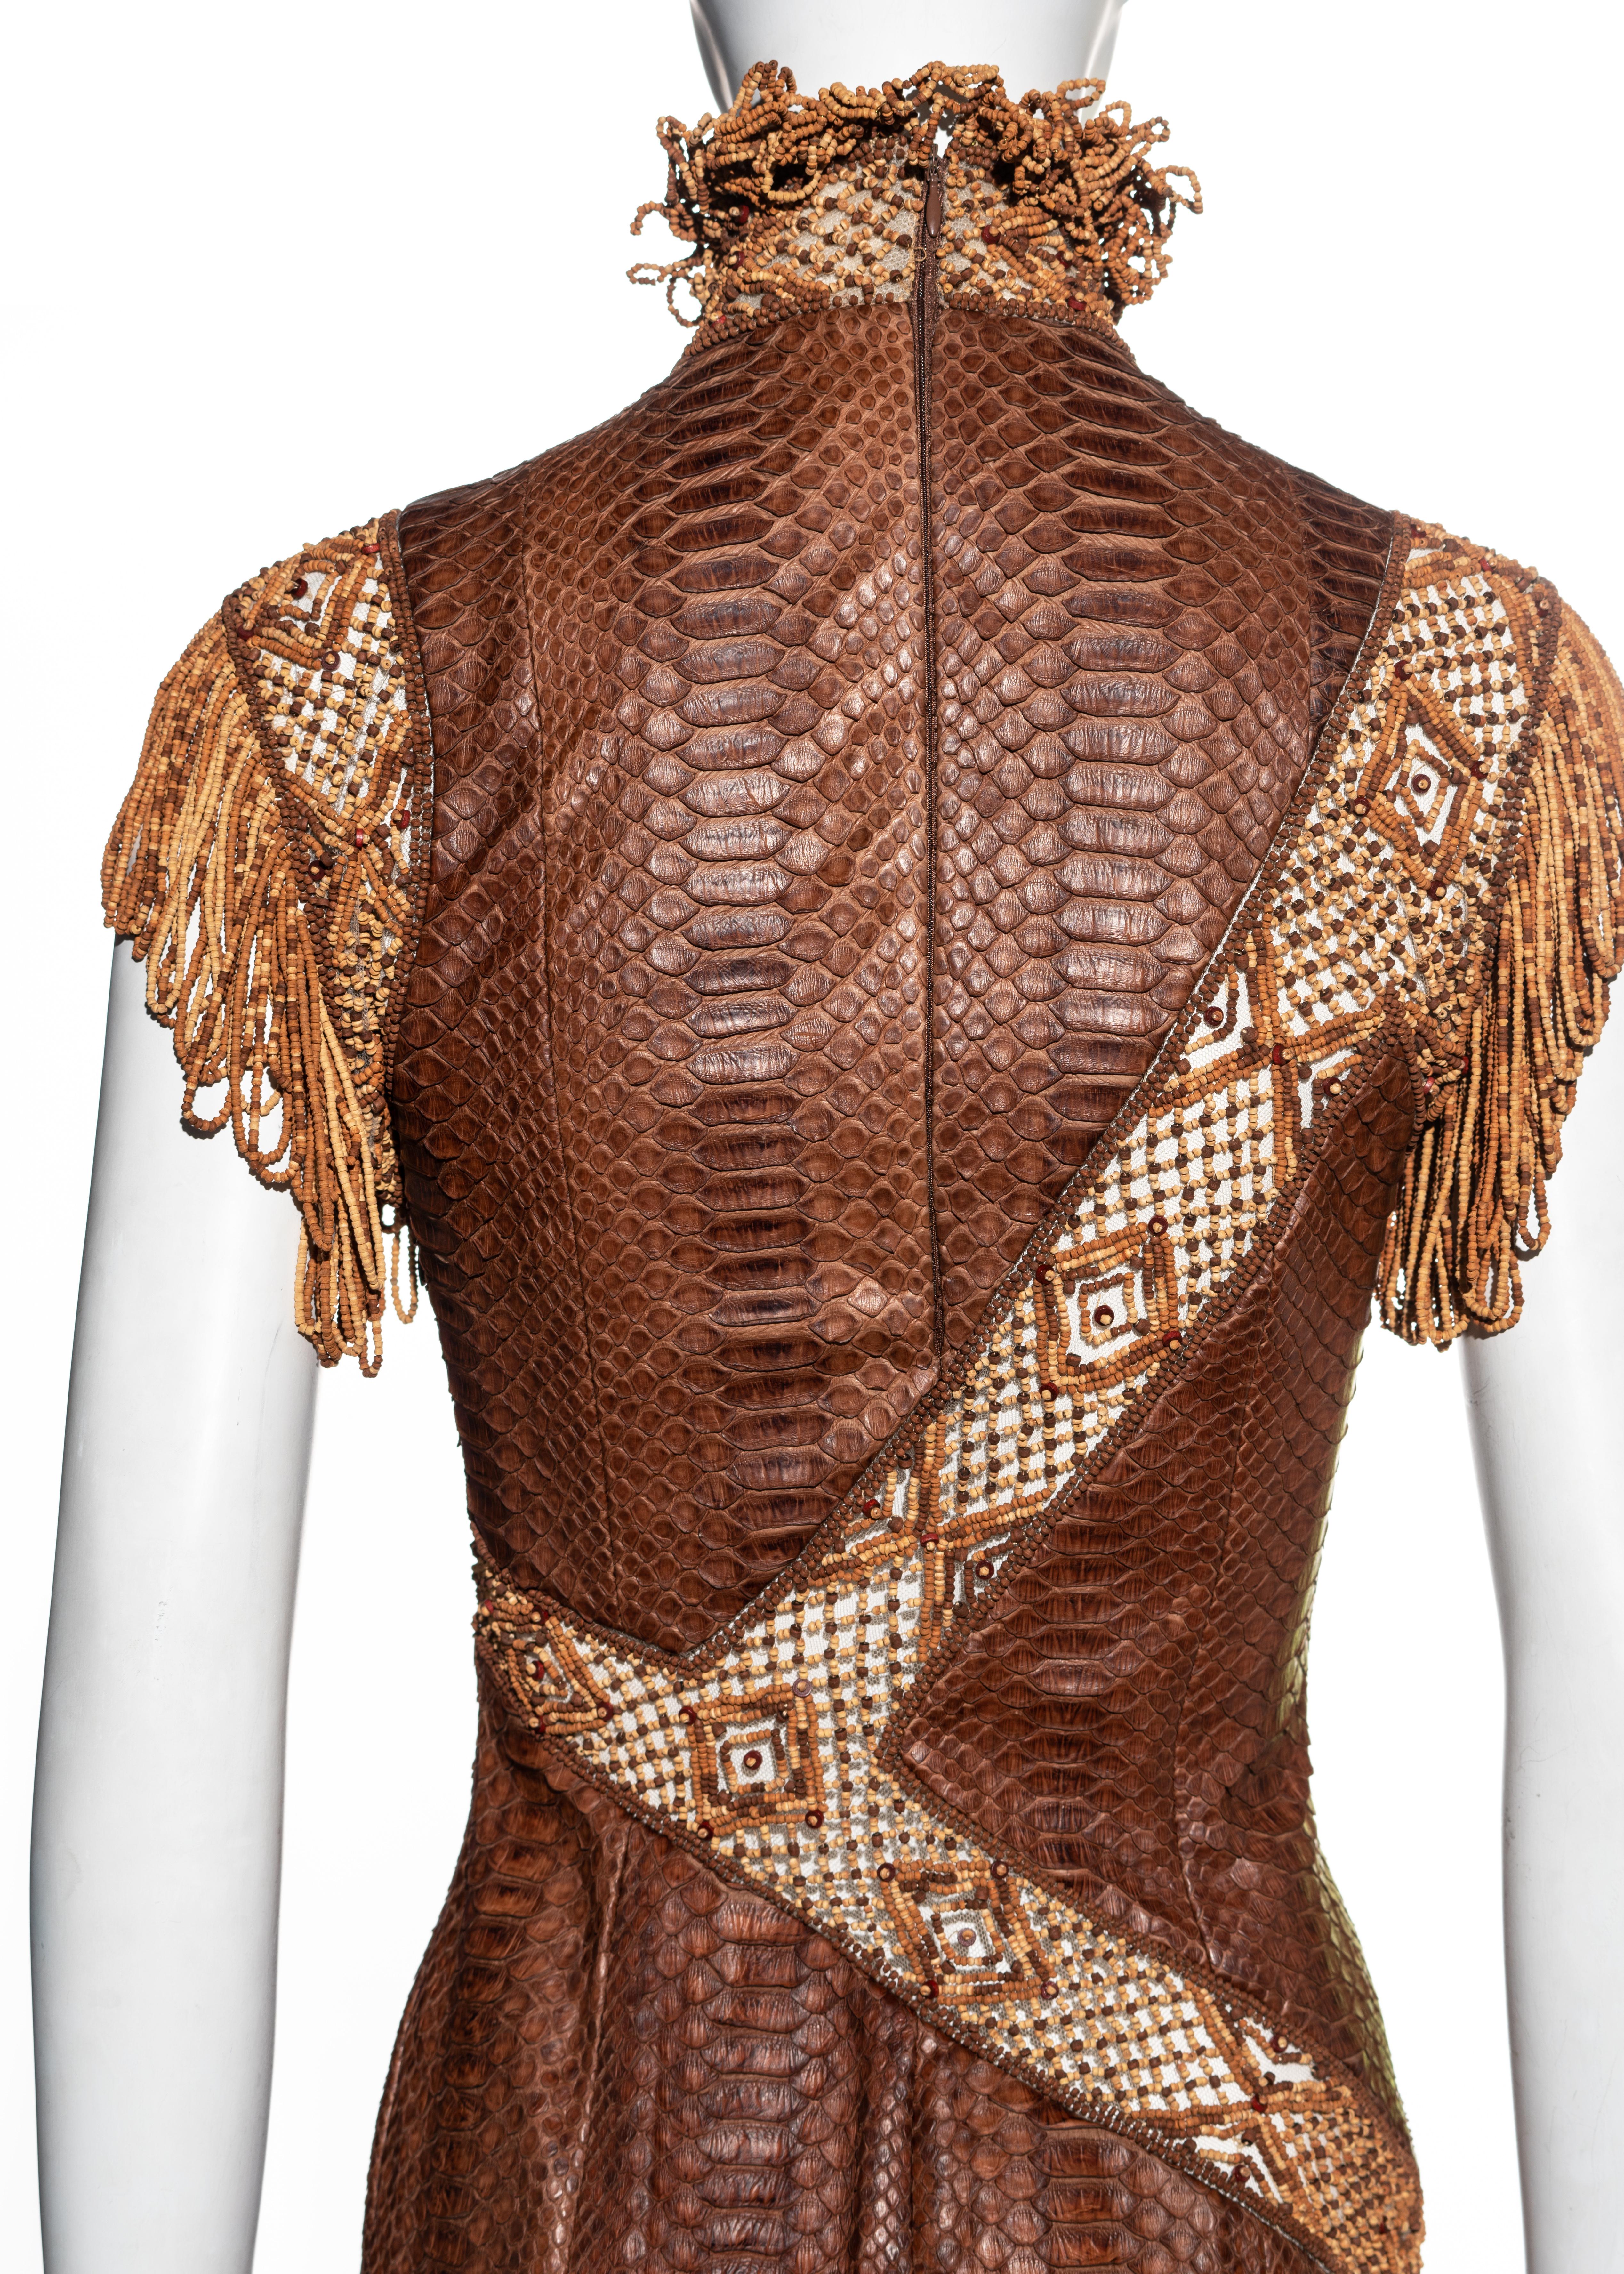 Givenchy by Alexander McQueen Haute Couture brown snakeskin dress, ss 2001 3